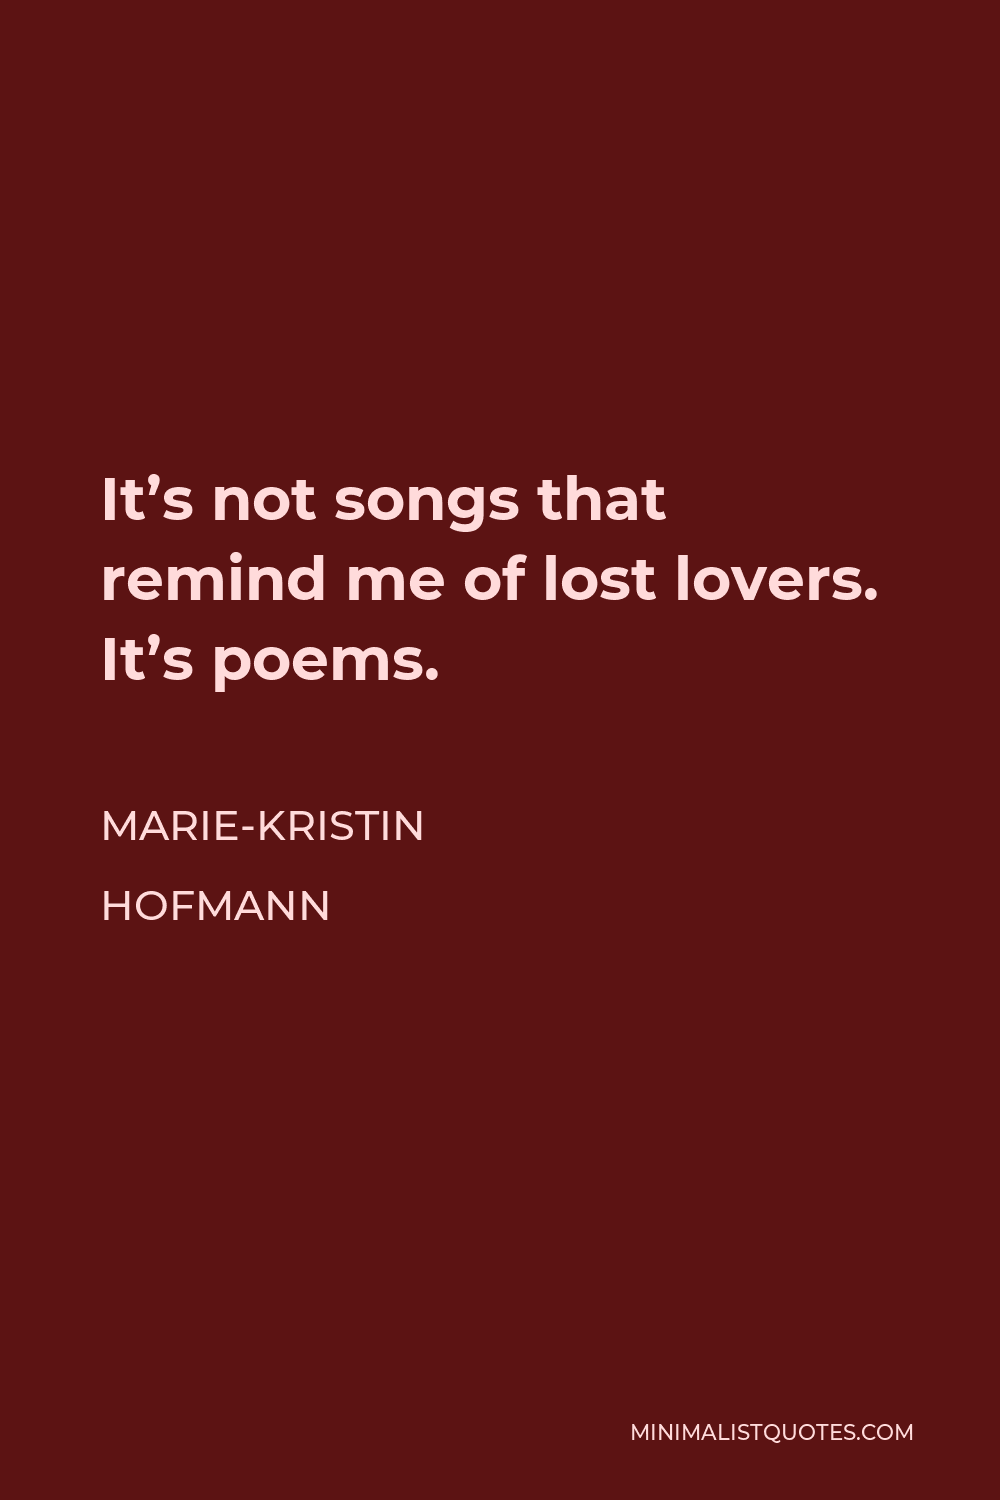 Marie-Kristin Hofmann Quote - It’s not songs that remind me of lost lovers. It’s poems.